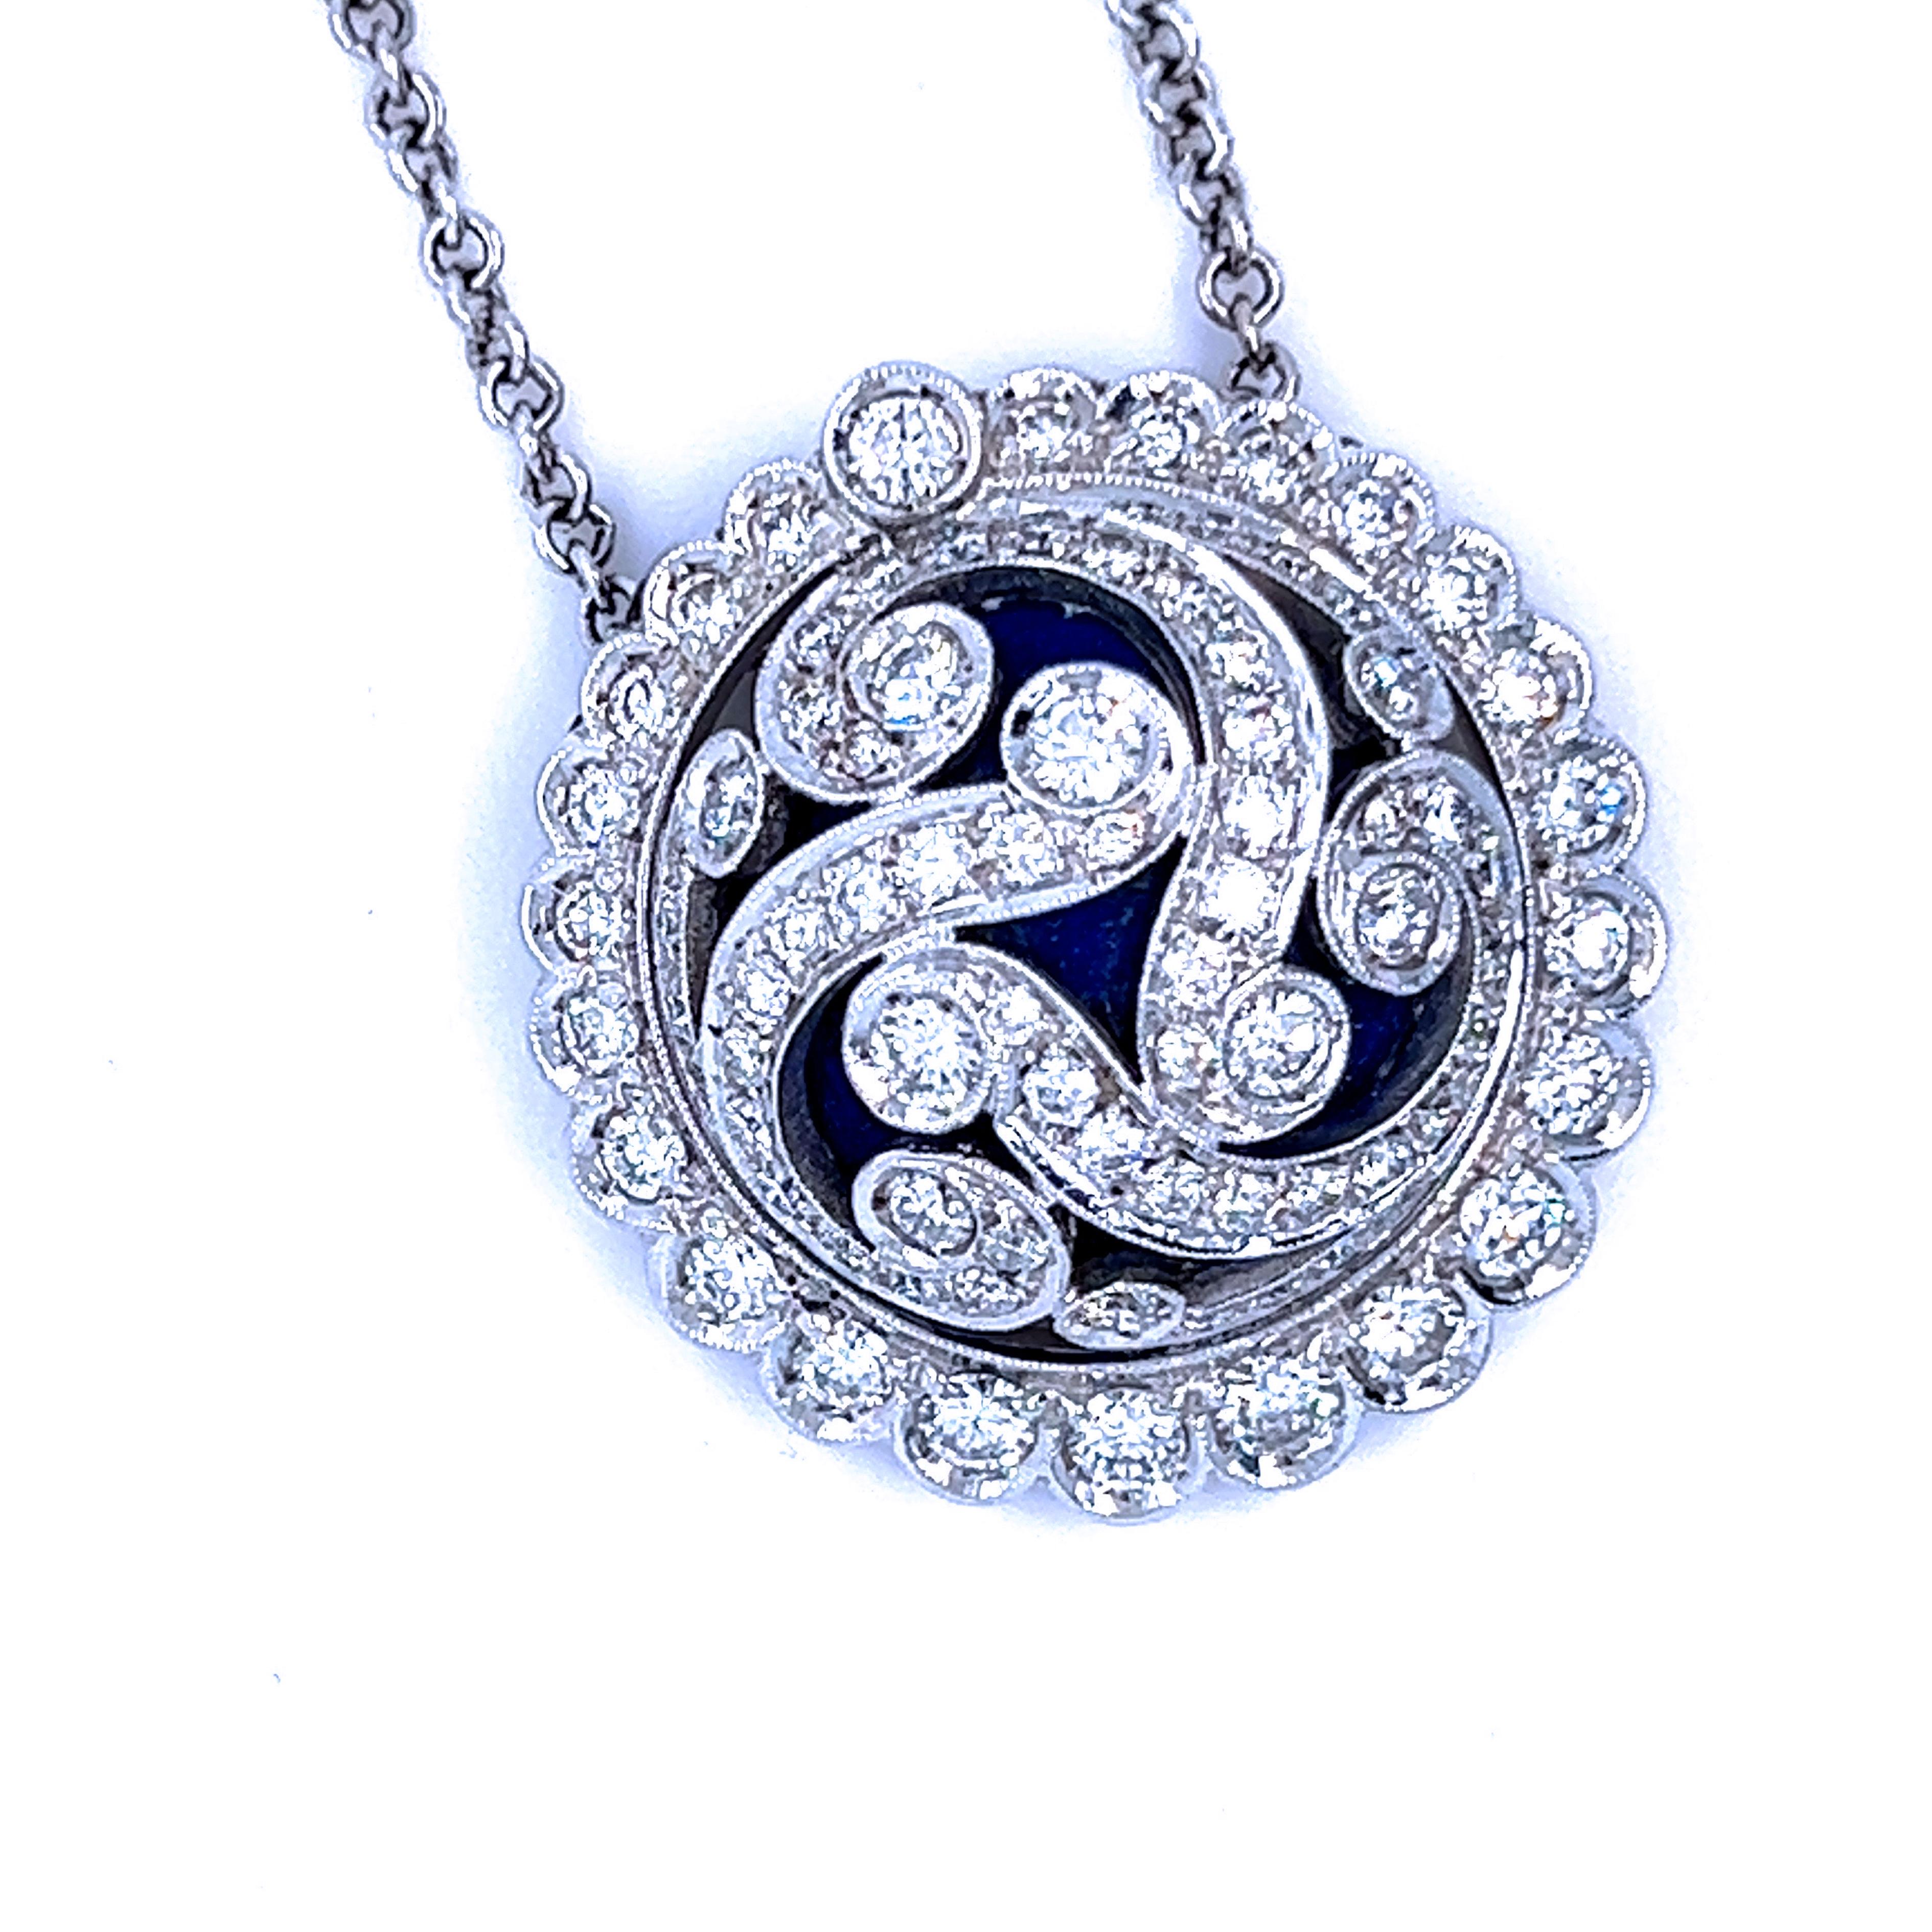 2.80 Karat White Diamond Royal Blue Enamel White Gold Necklace In New Condition For Sale In Valenza, IT